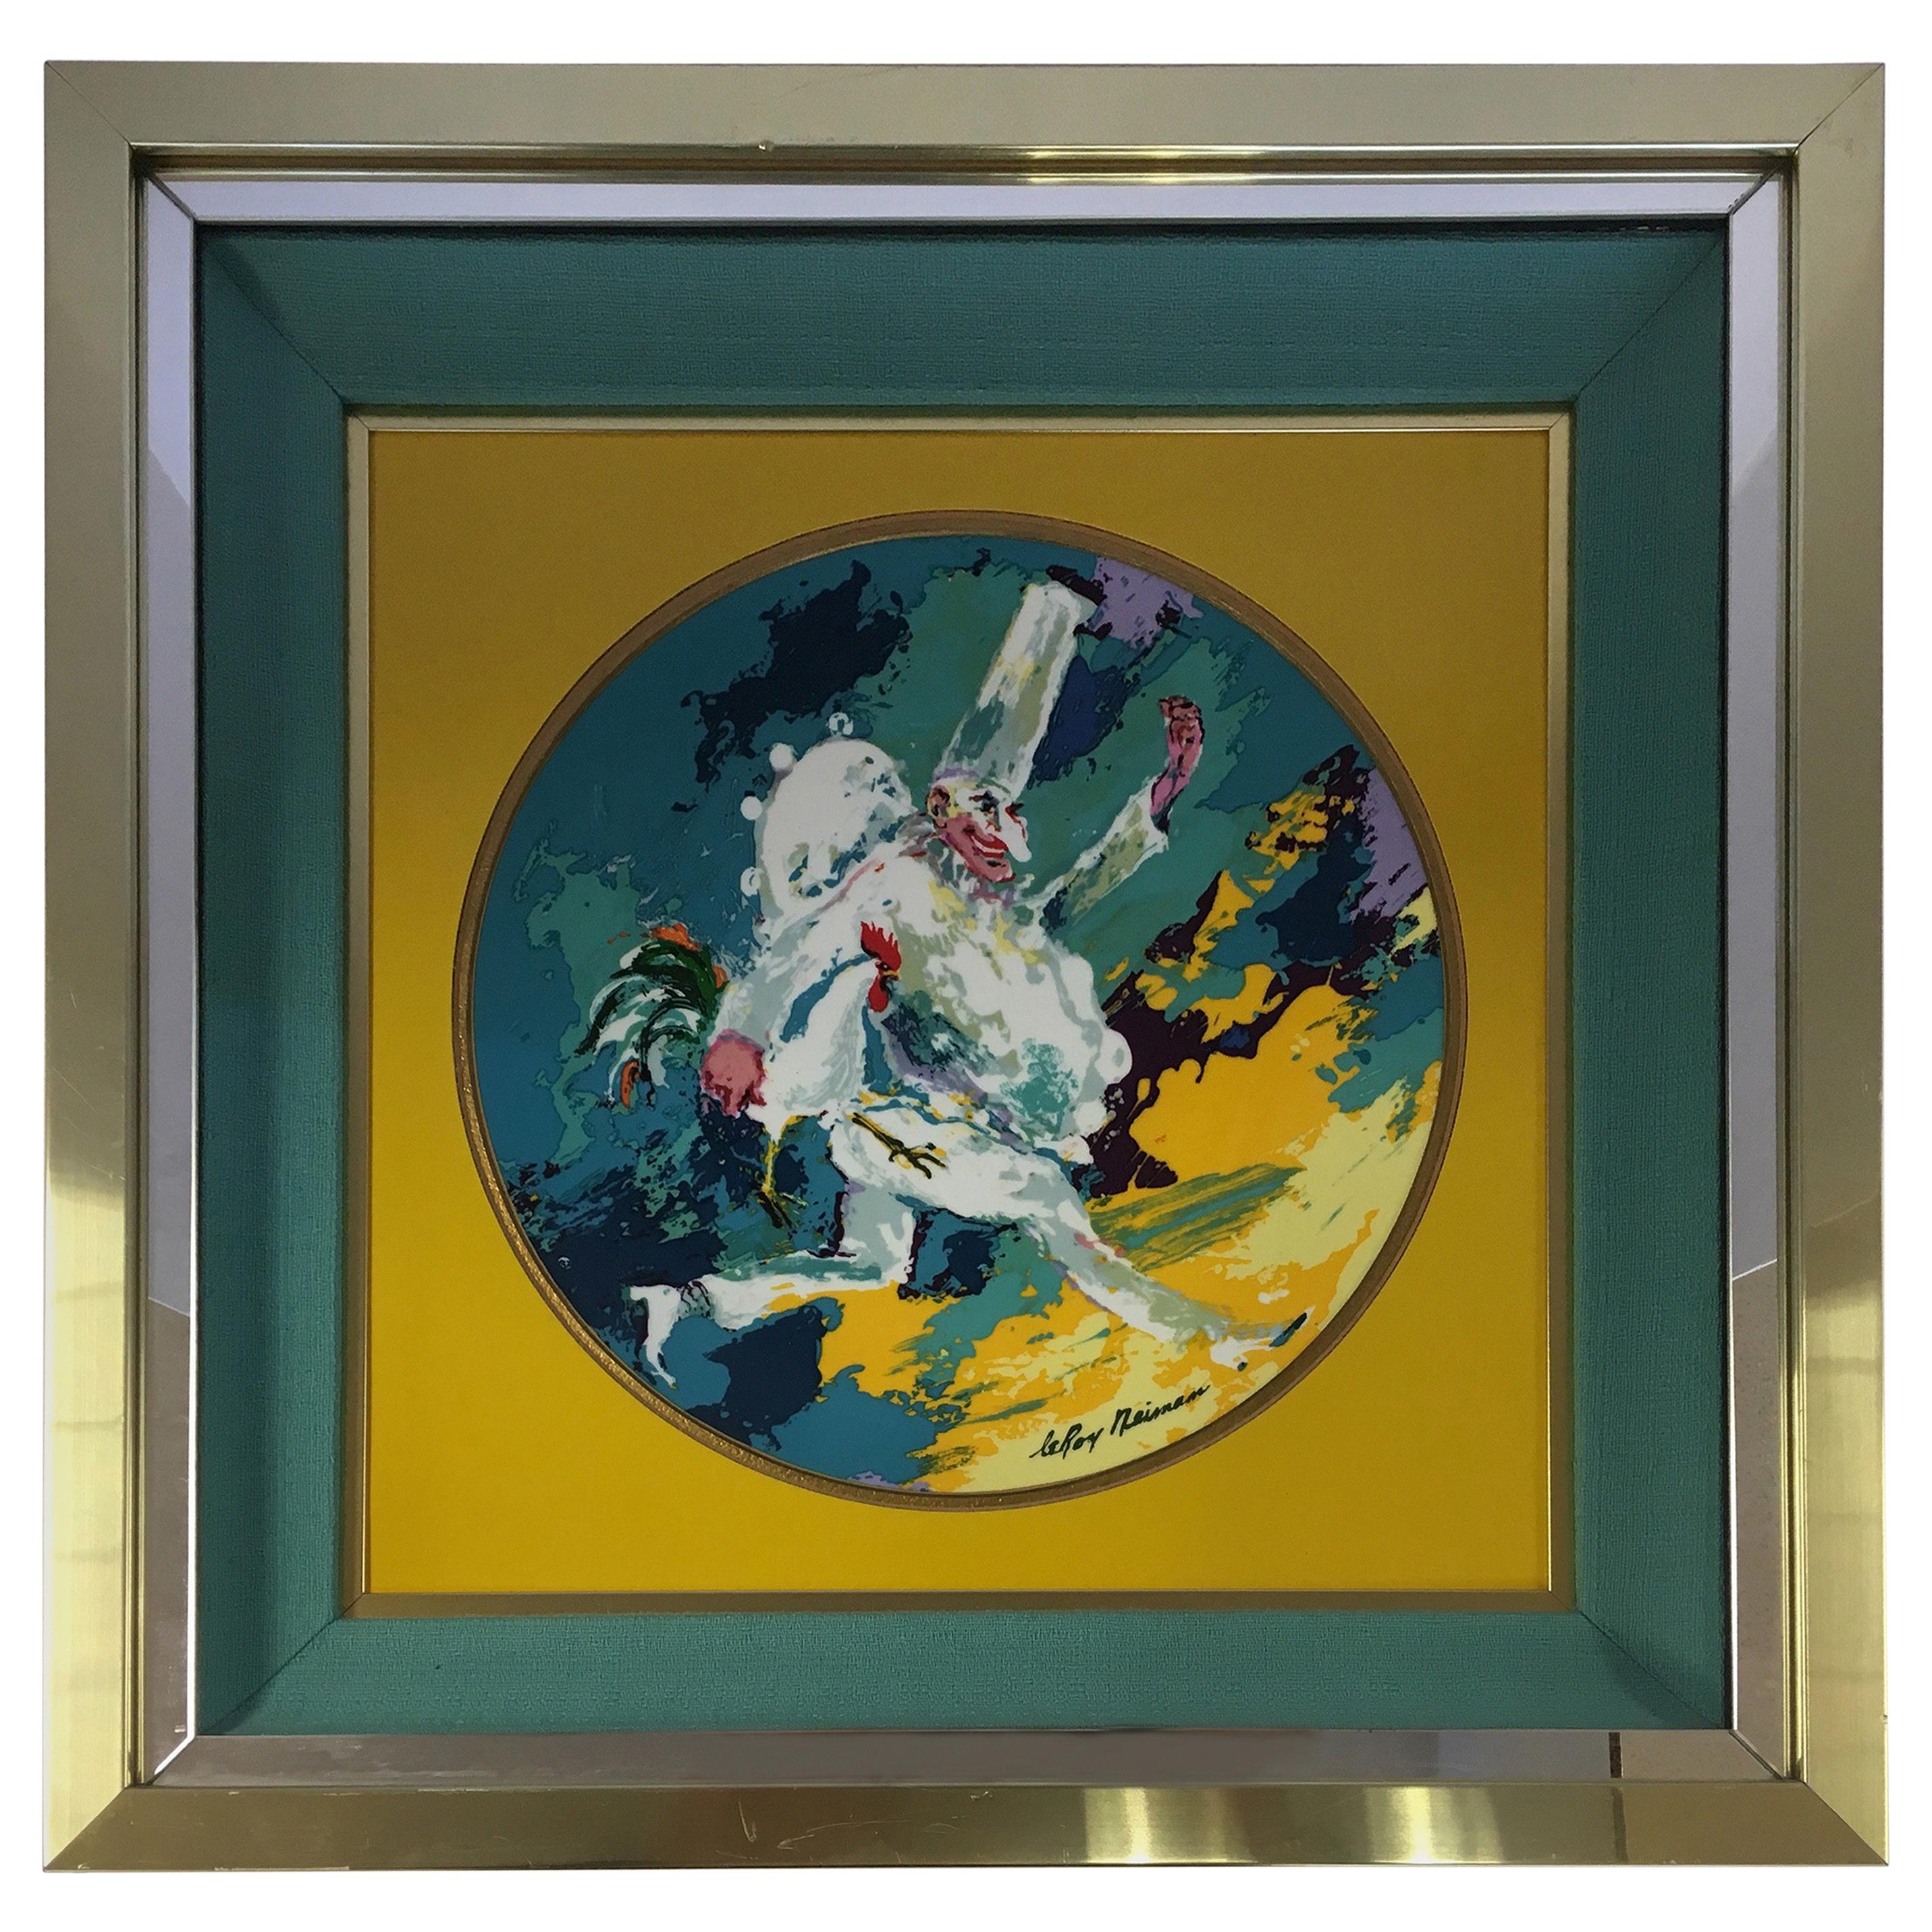 Leroy Neiman Limited Edition Royal Doulton Punchinello 1978 Framed Artwork Plate